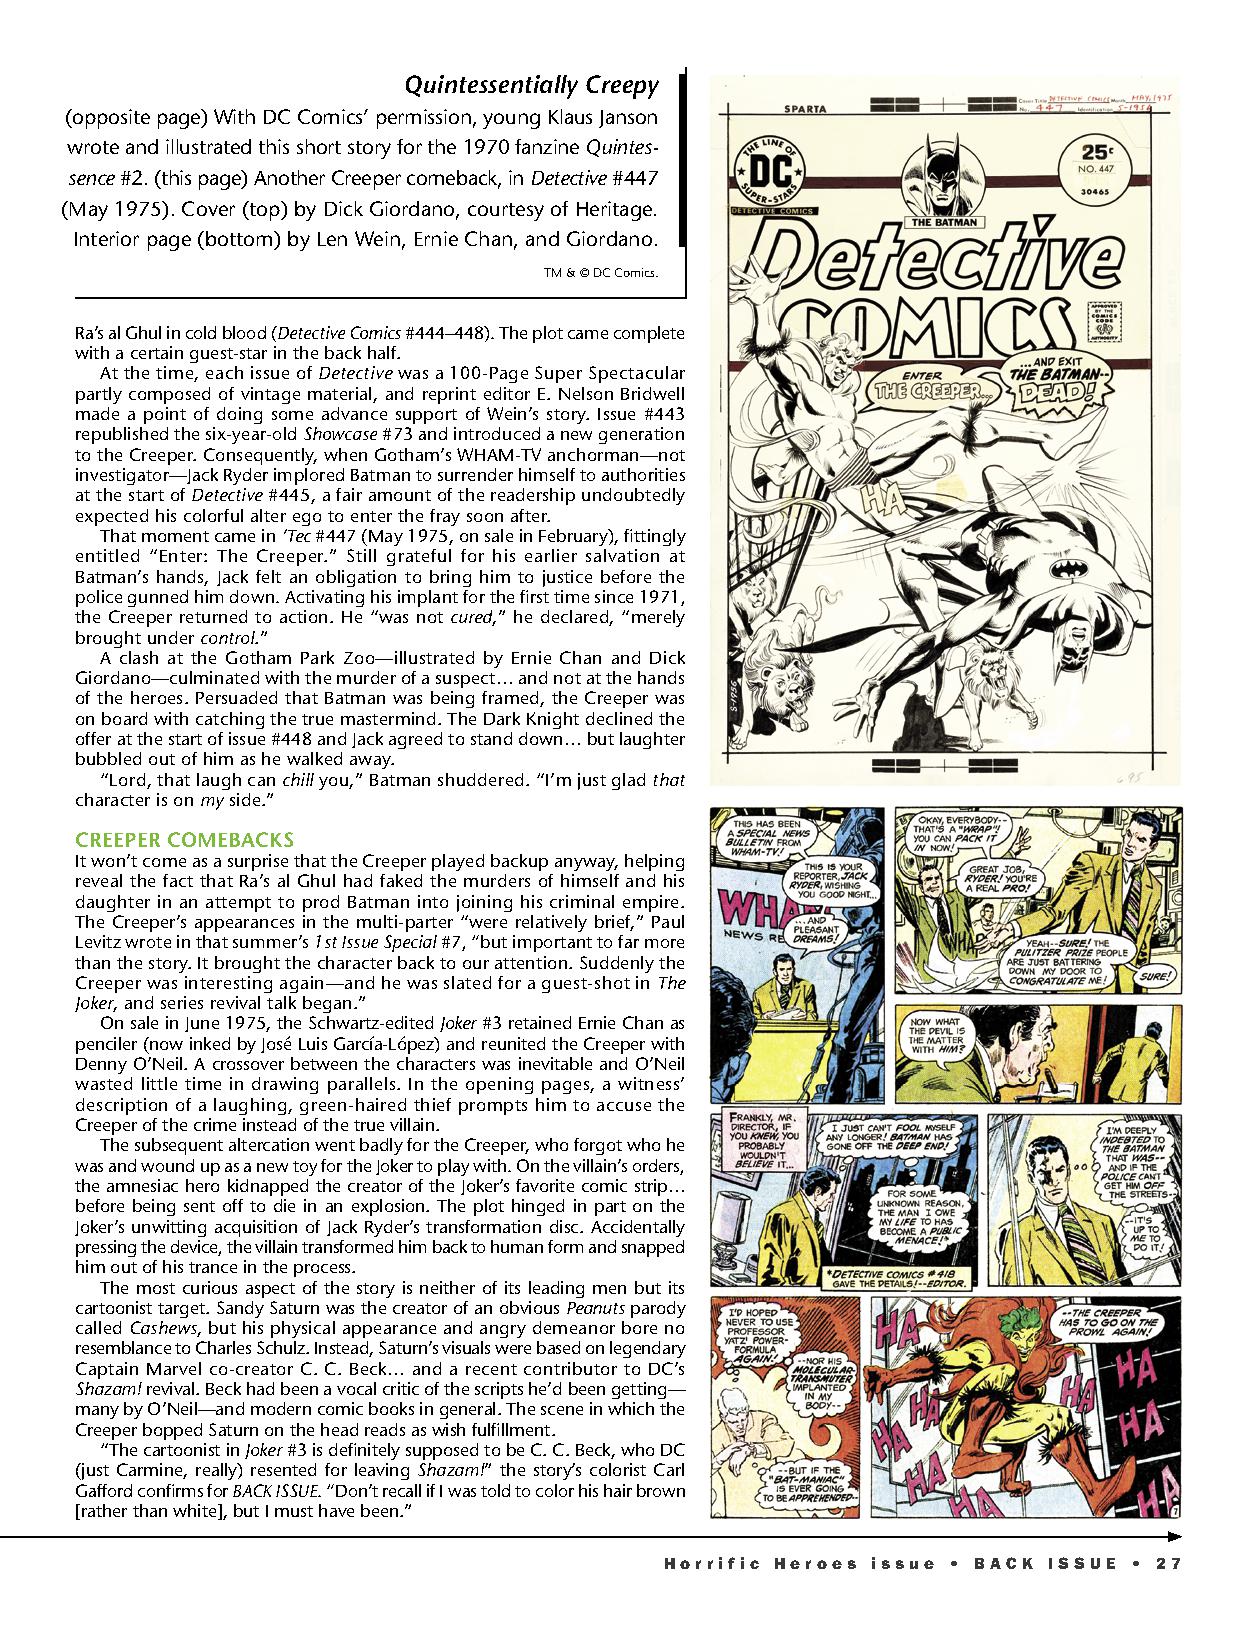 Read online Back Issue comic -  Issue #124 - 29